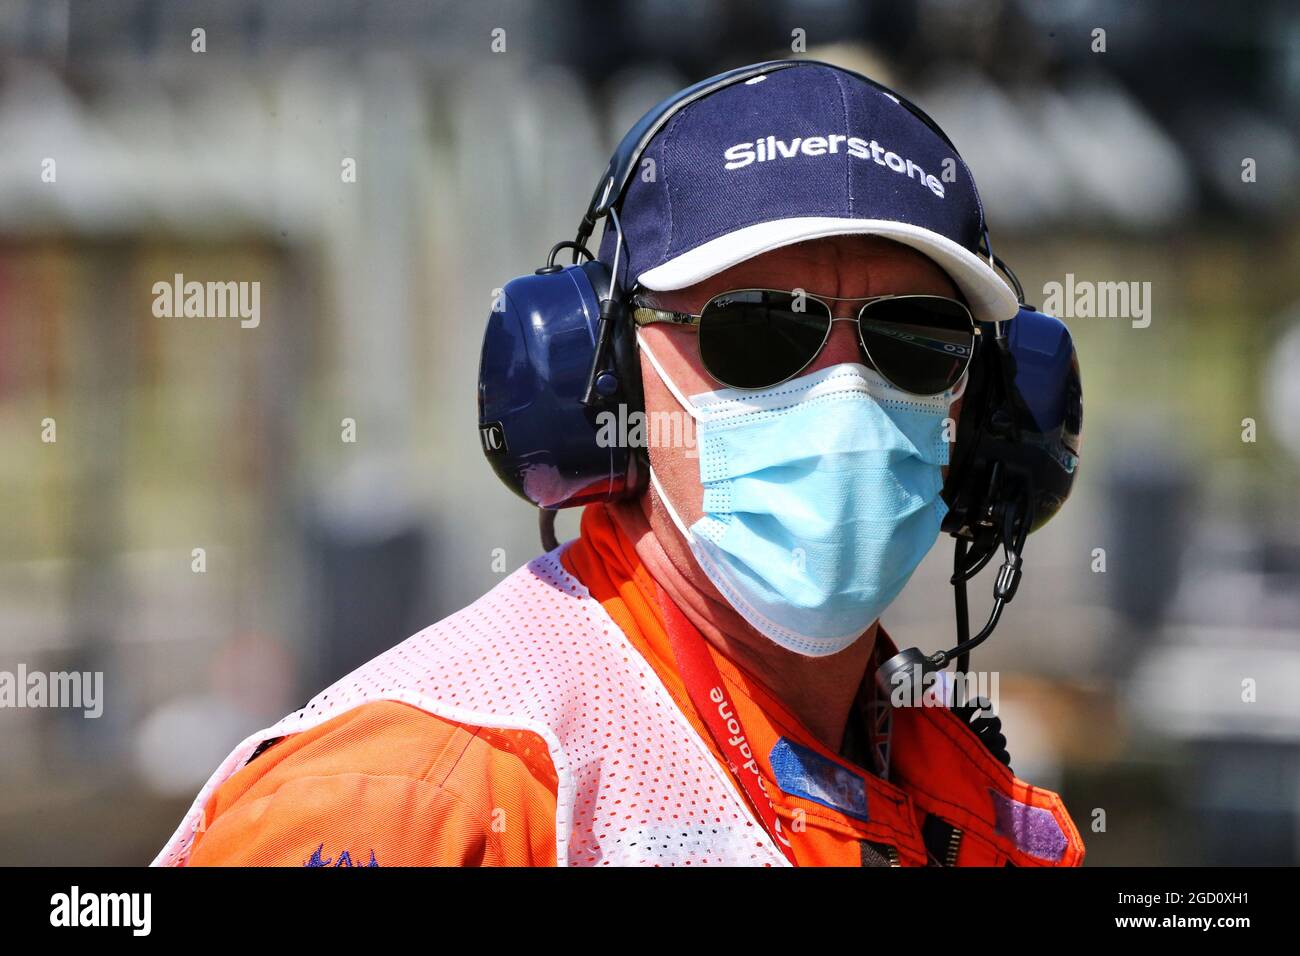 Circuit atmosphere - marshal in the pits. British Grand Prix, Friday 31st July 2020. Silverstone, England. Stock Photo